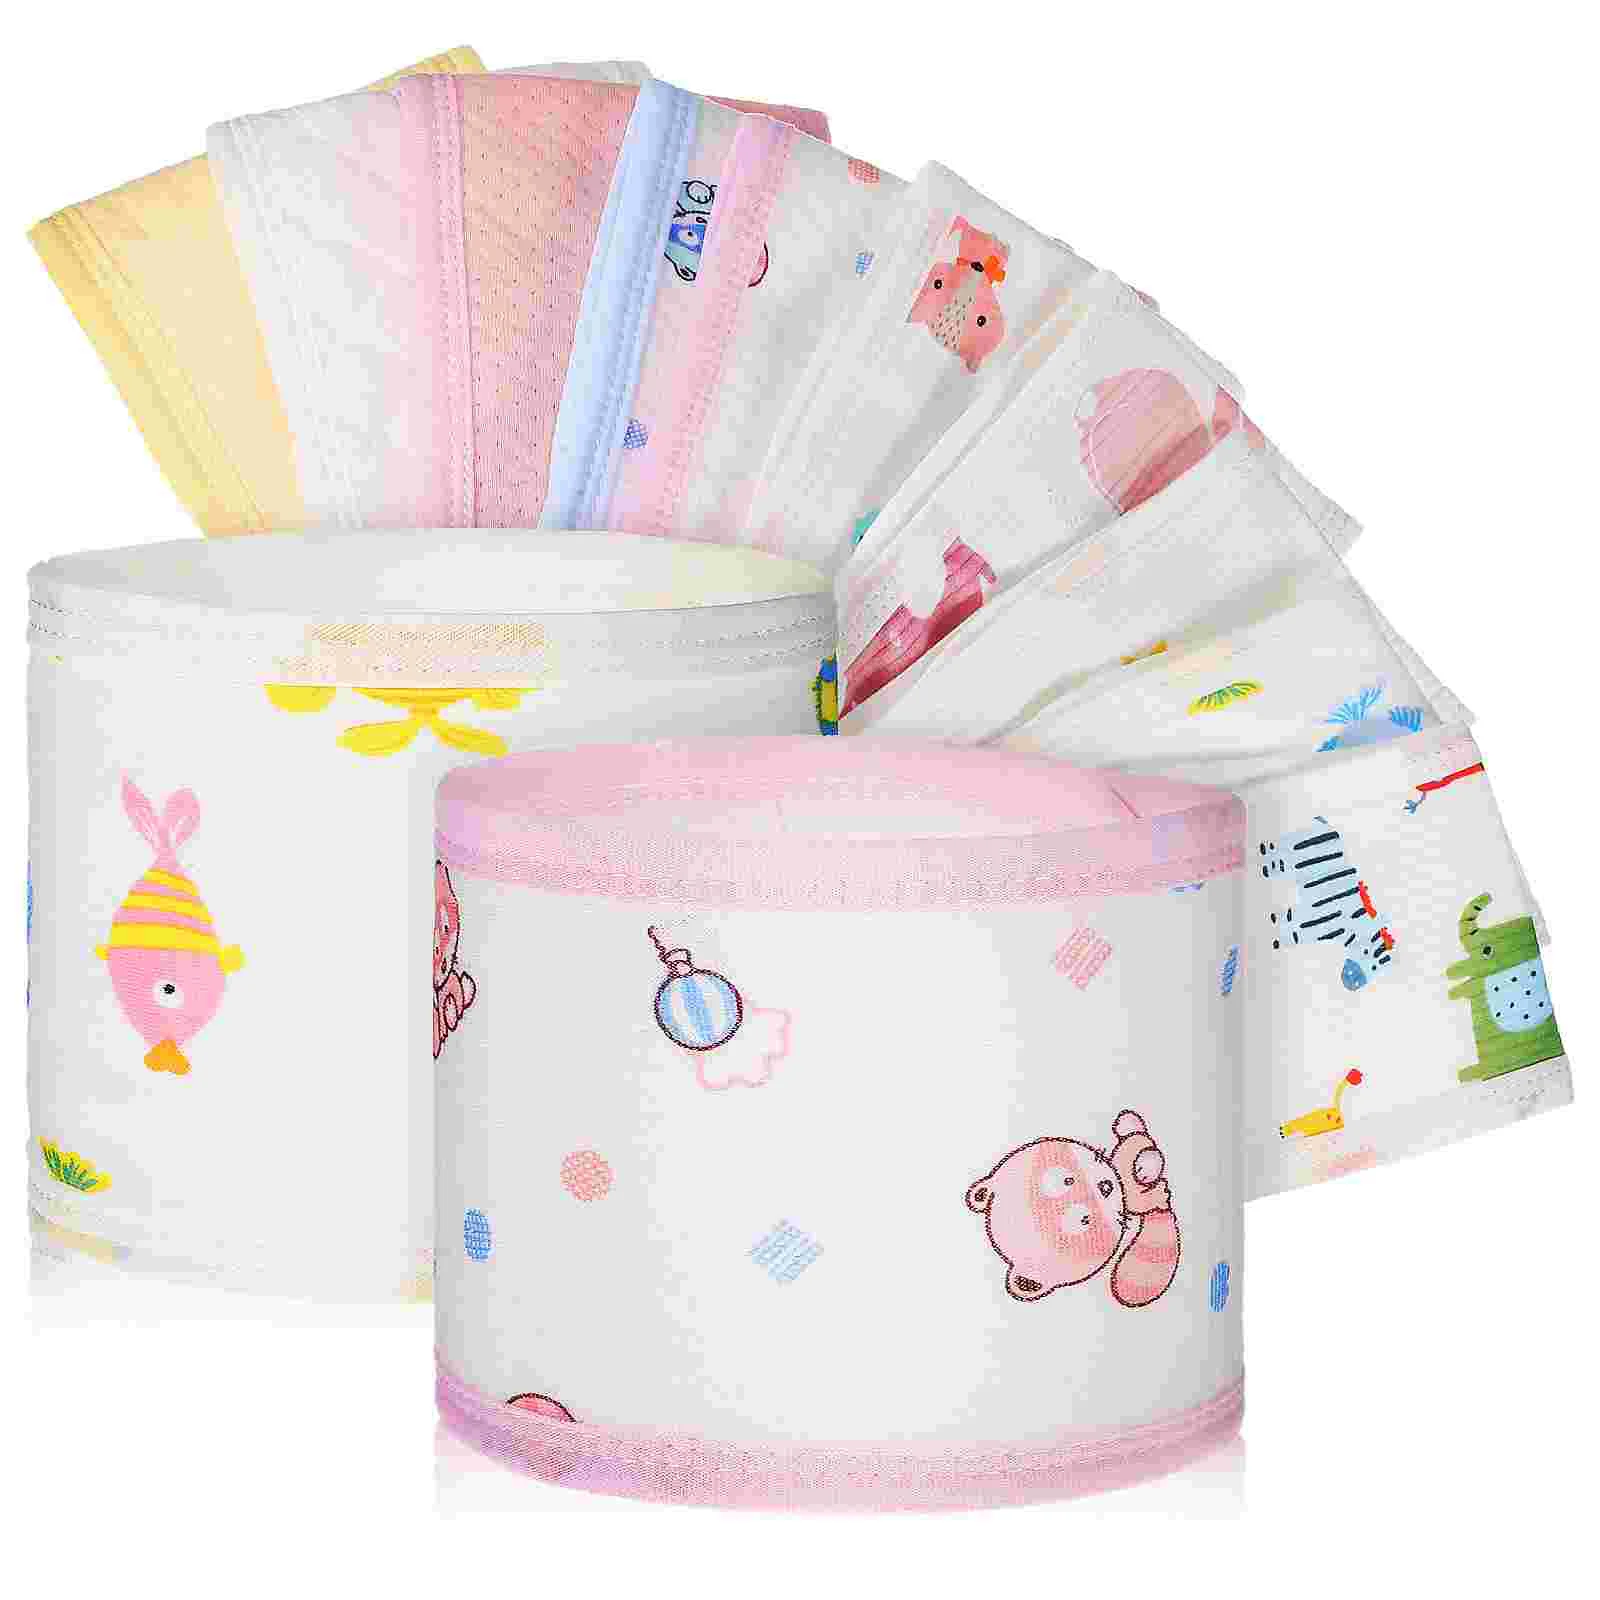 

10 Pcs Infant Belly Wraps Baby Umbilical Cord Newborn Bands Circumference Cotton Straps